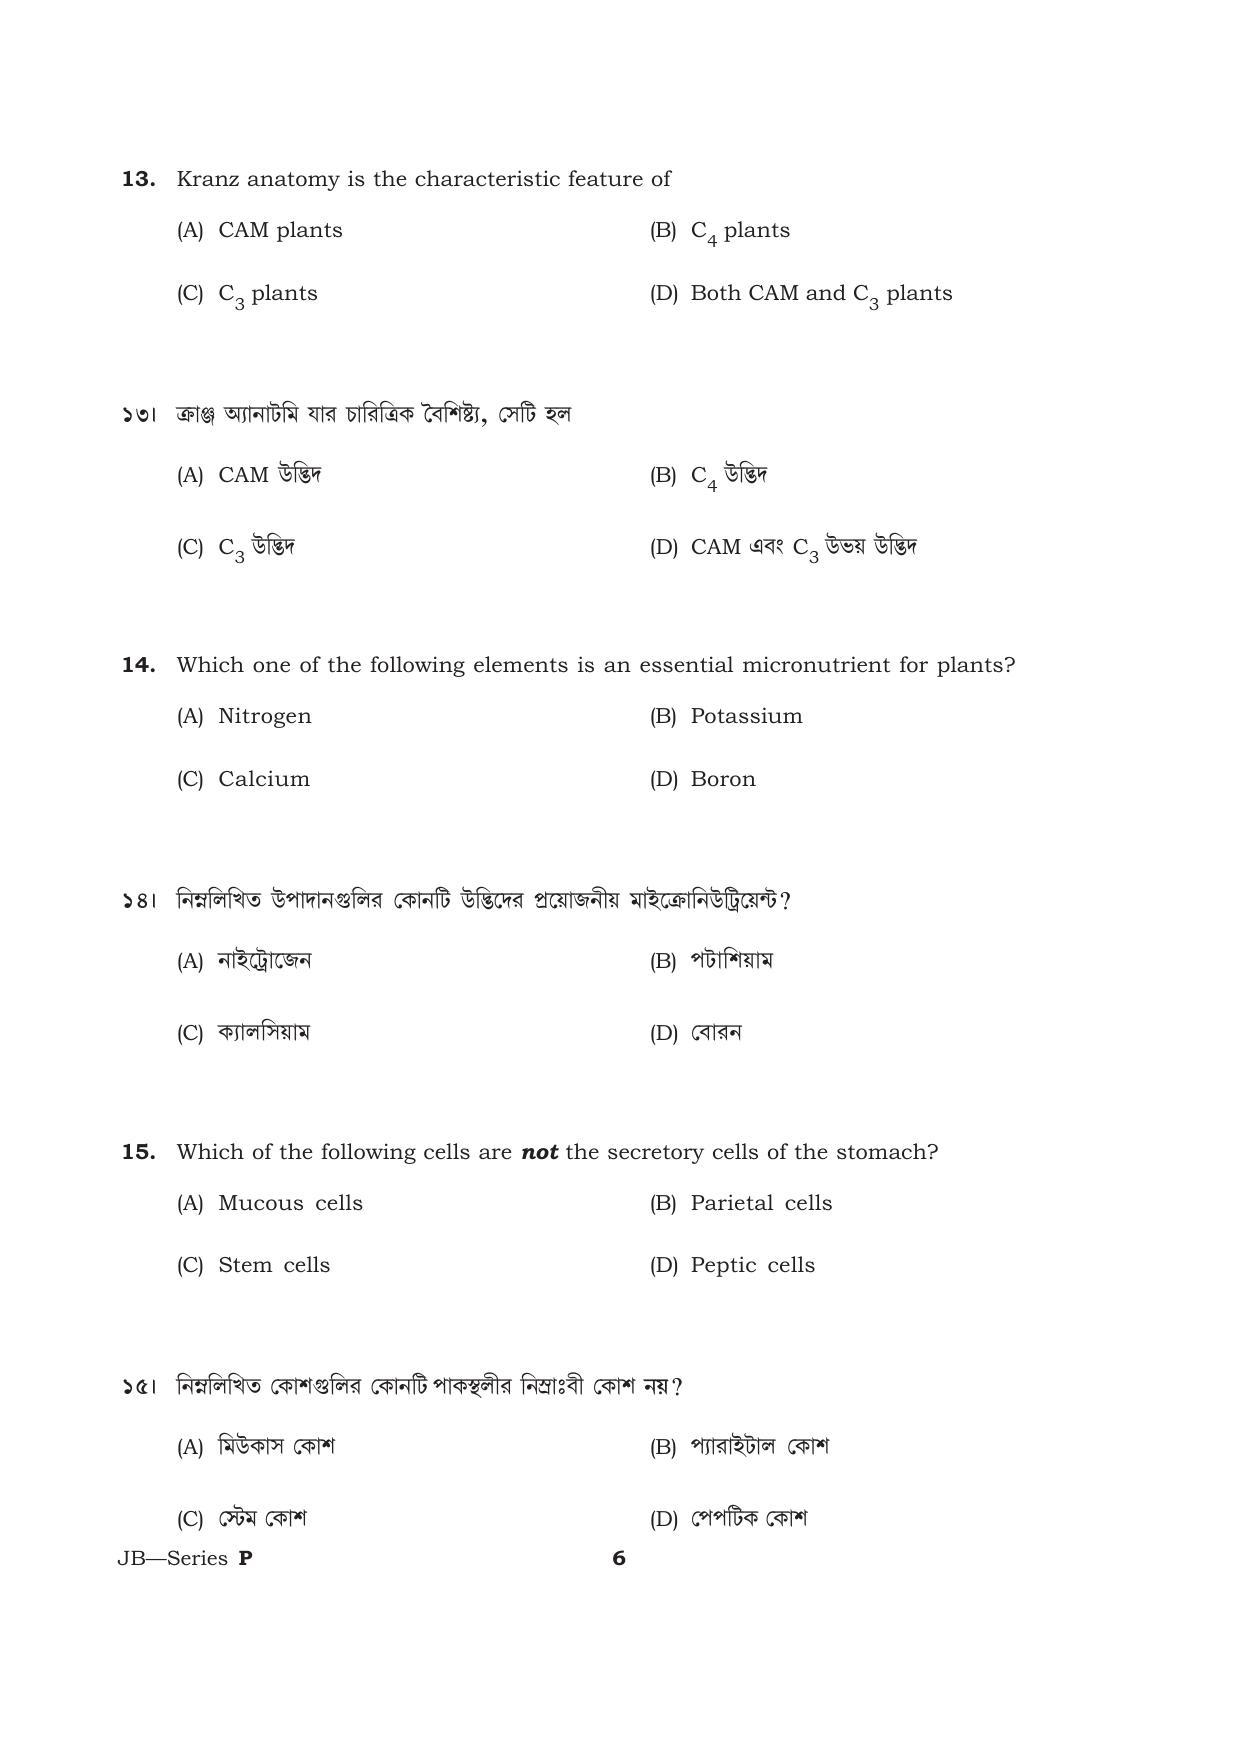 TBJEE Question Paper 2021 - Biology - Page 6